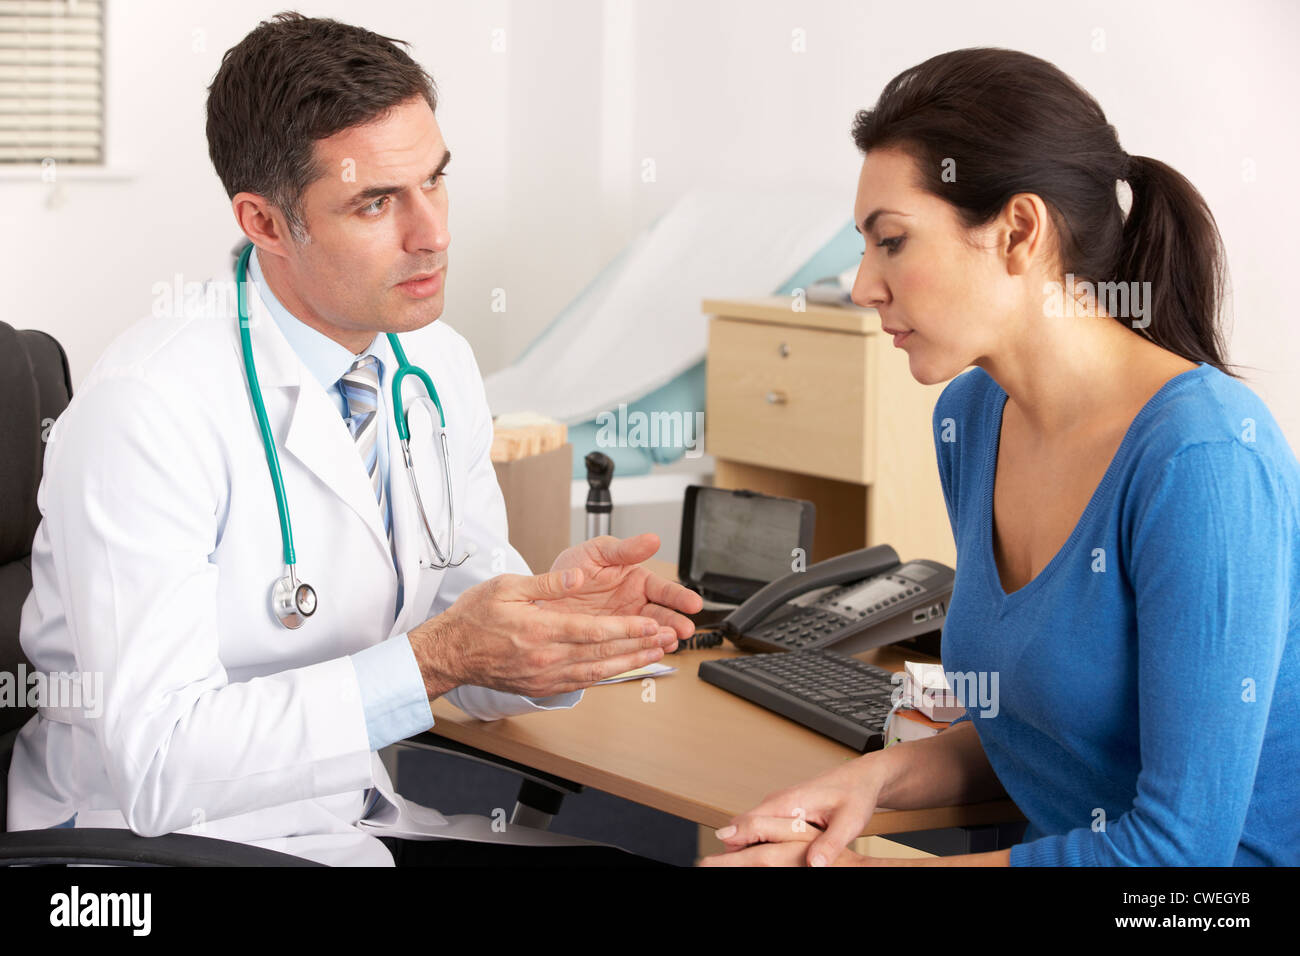 American doctor talking to woman in surgery Stock Photo